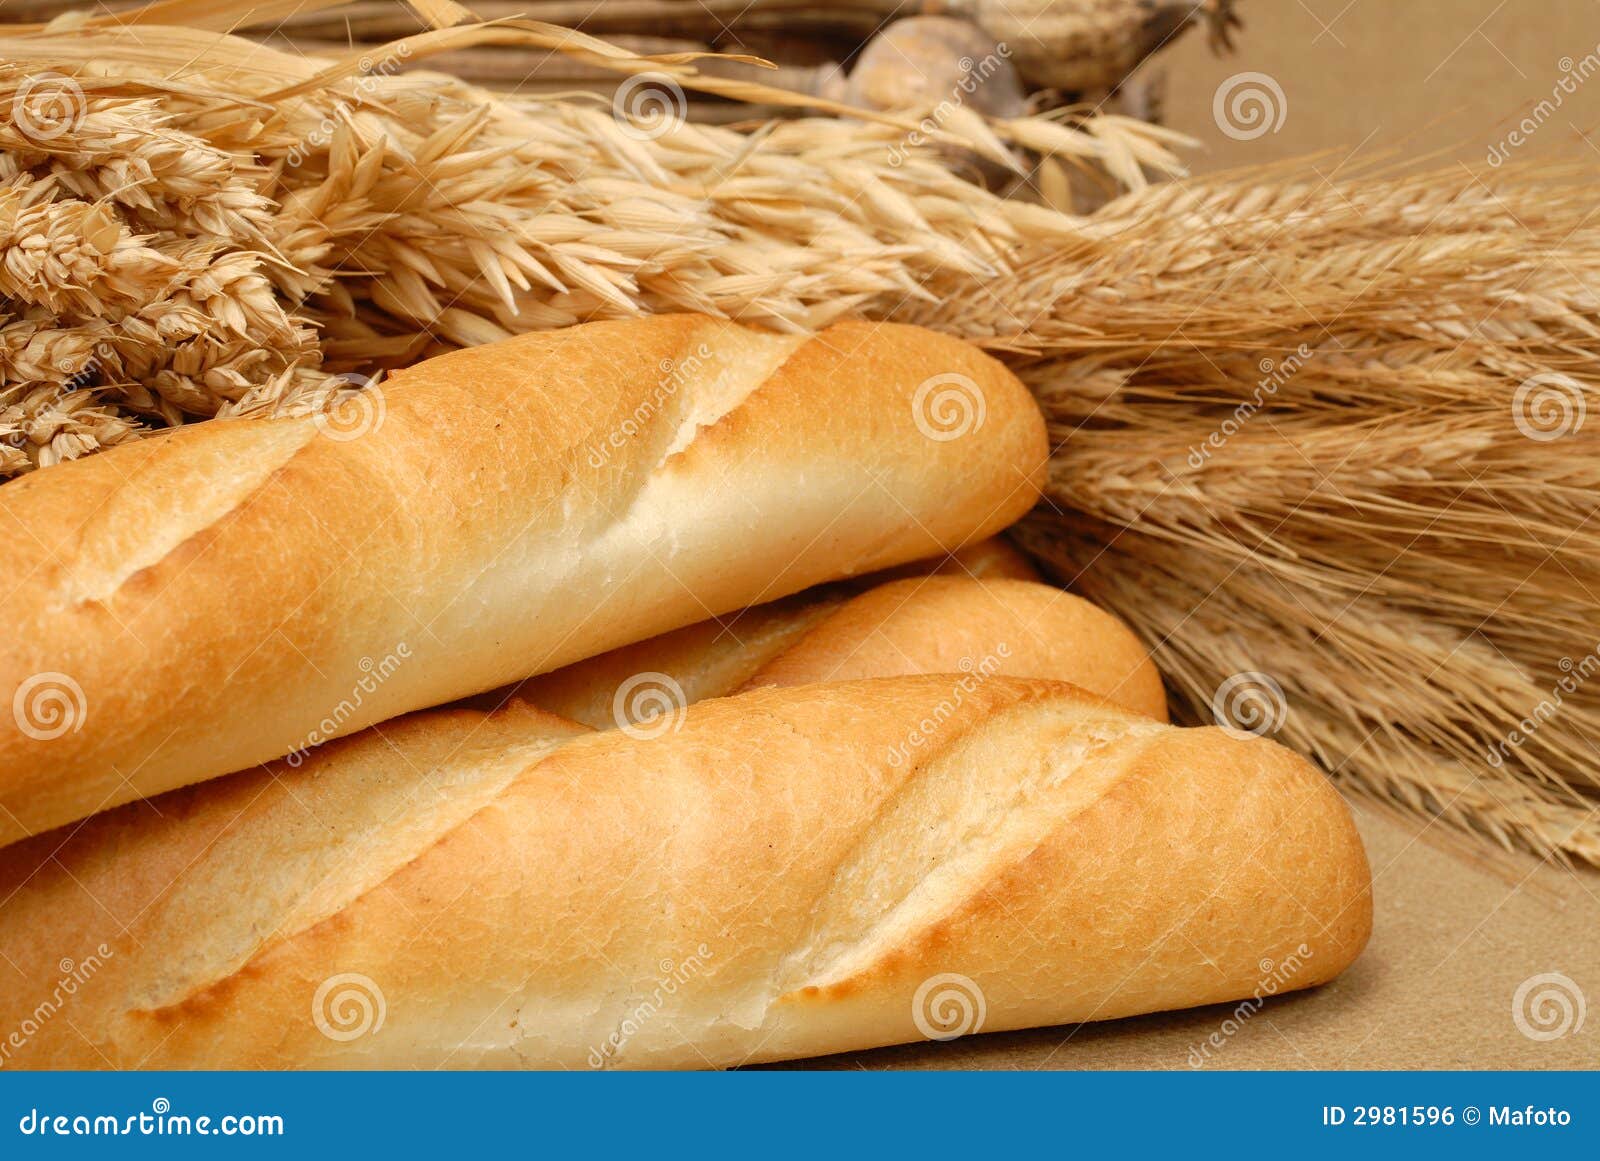 baguette and wheat